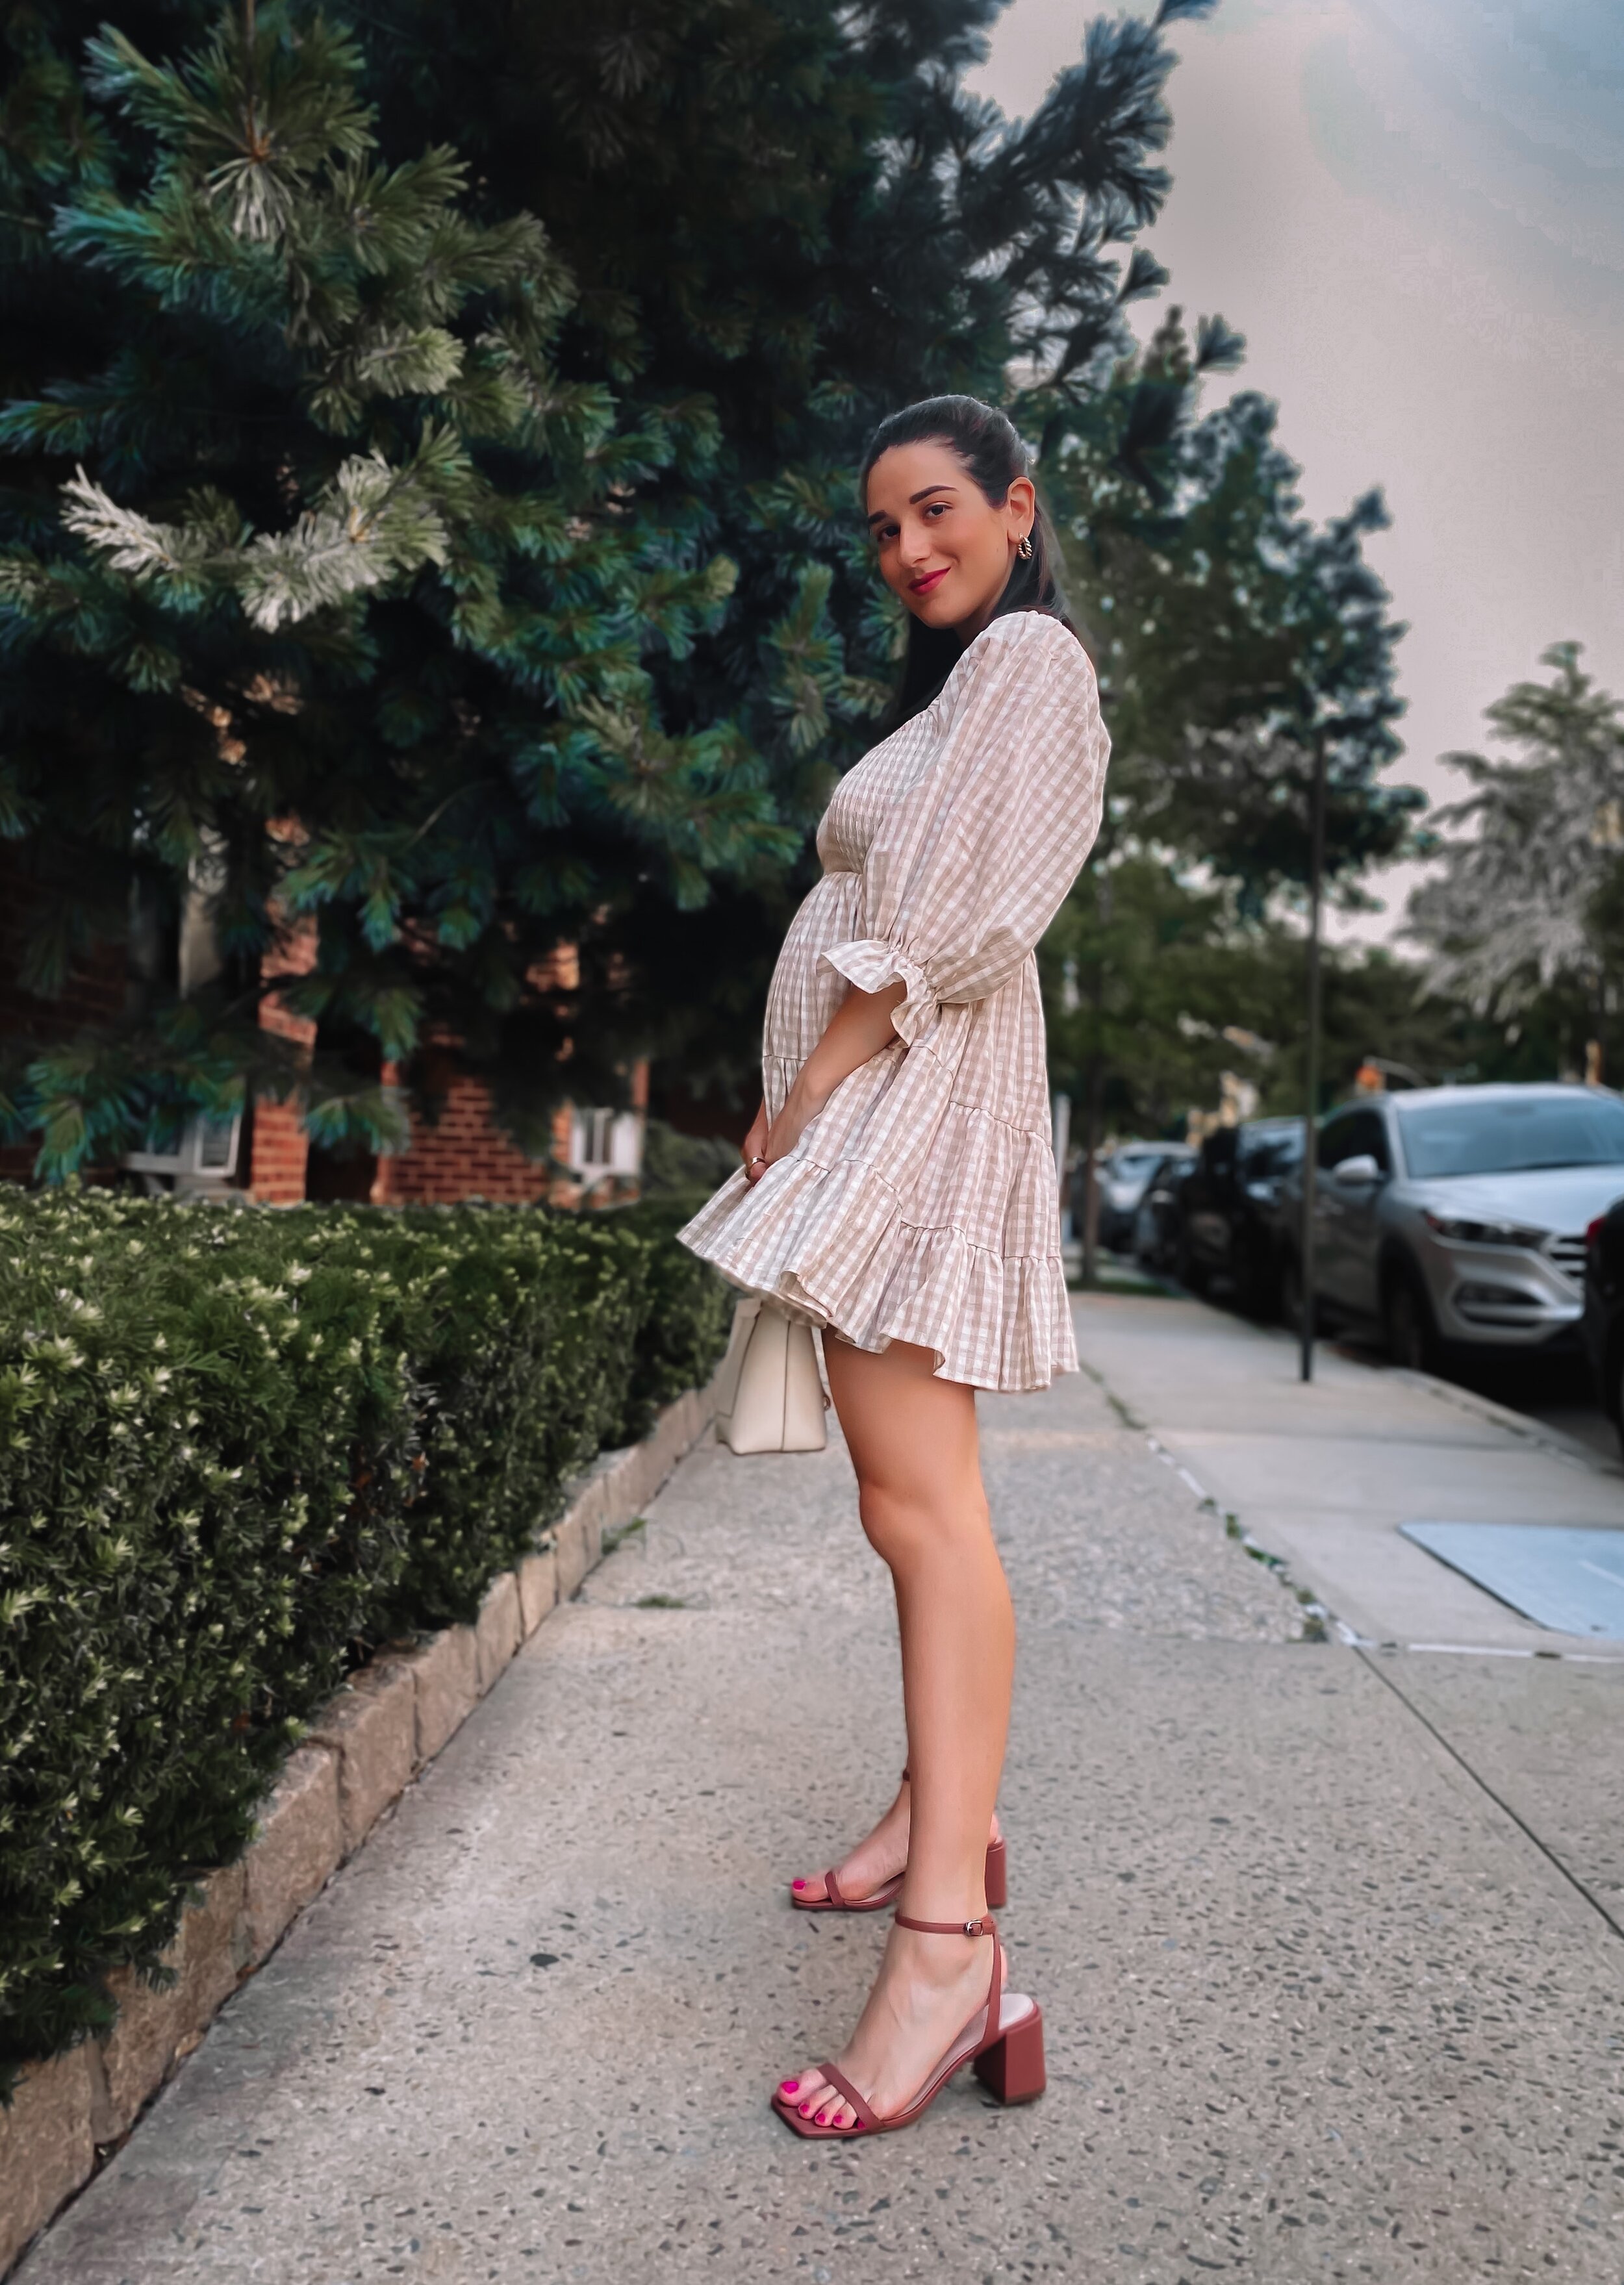 Gingham Puff Sleeve Dress + Tan Sandals Esther Santer NYC Street Style Fashion Blogger Cute Look Shopping Olive & Paix Mini Ruffle Dress Charles Keith Shoes Bag Gold Hoop Earrings Half Ponytail Girl Women Red Lipstick New York City 2021 What To  Wear.jpg